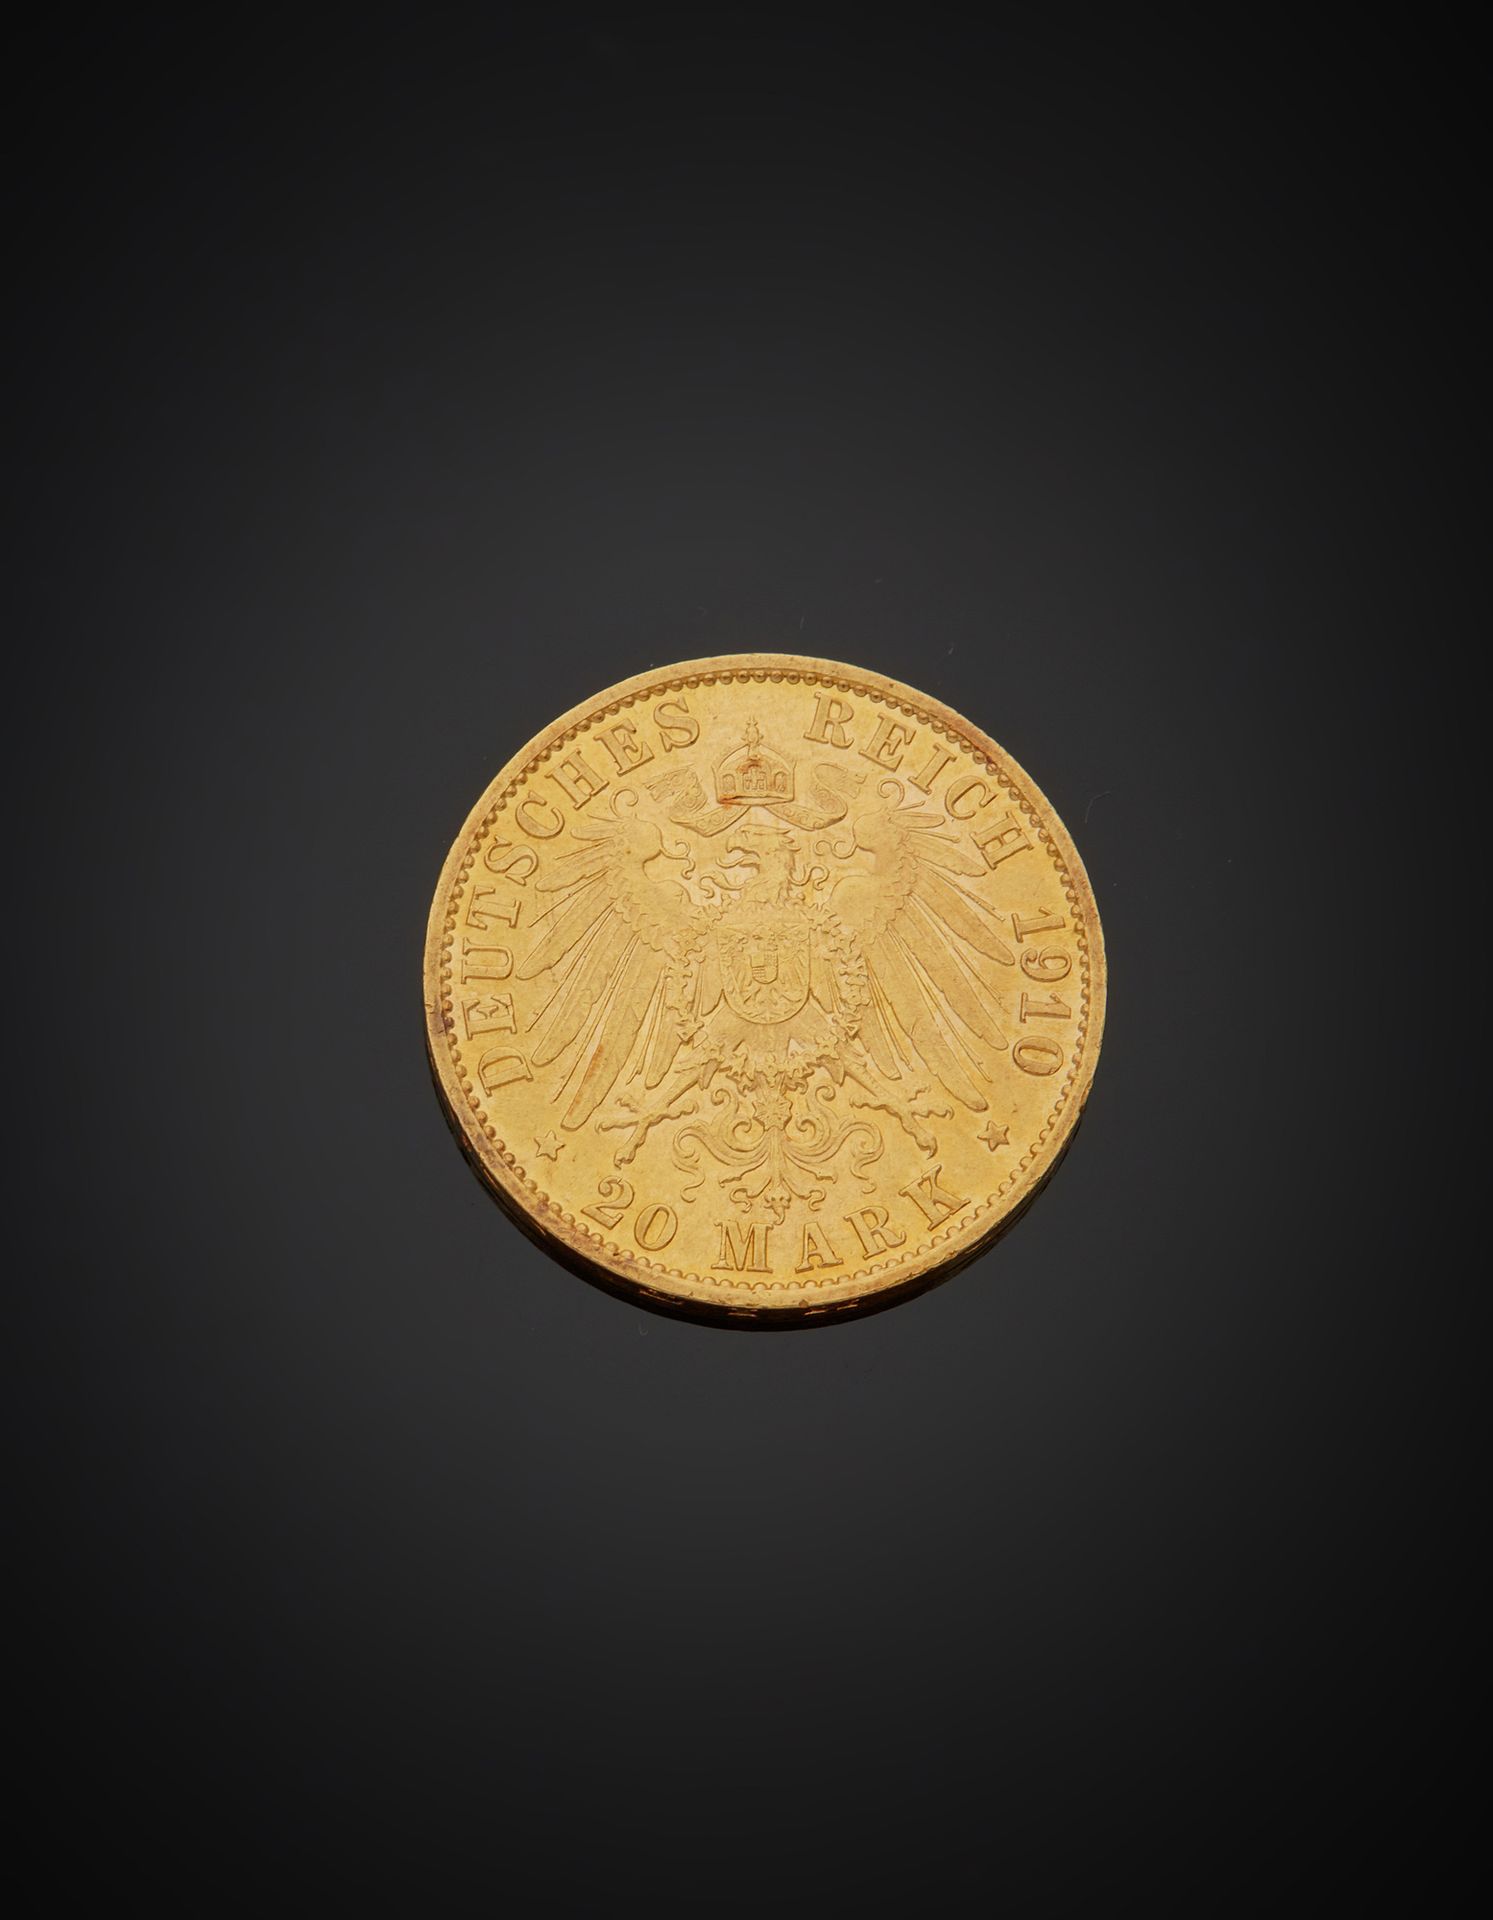 Null 20 Marks gold coin, 1910. Weight 7,90 g